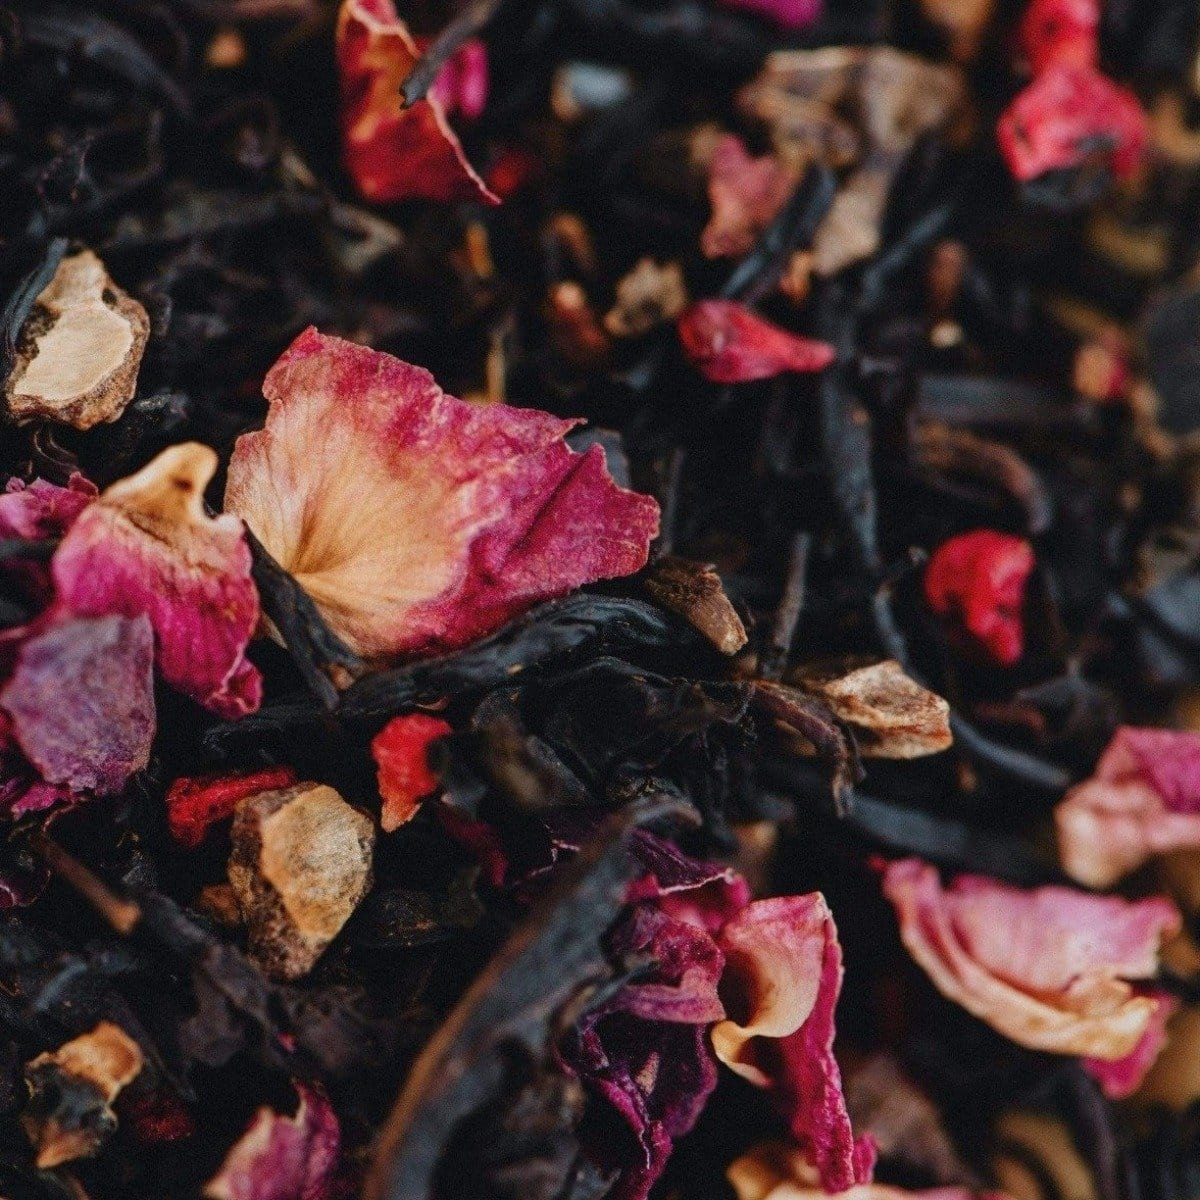 A close-up image of a blend of dried organic tea leaves mixed with vibrant pink and red rose petals, creating a colorful and textured composition. The varied shapes and hues of the petals contrast beautifully with the dark leaves in Magic Hour&#39;s Soulmate: Chocolate-Raspberry-Rose Black Tea for Finding &amp; Celebrating Love.